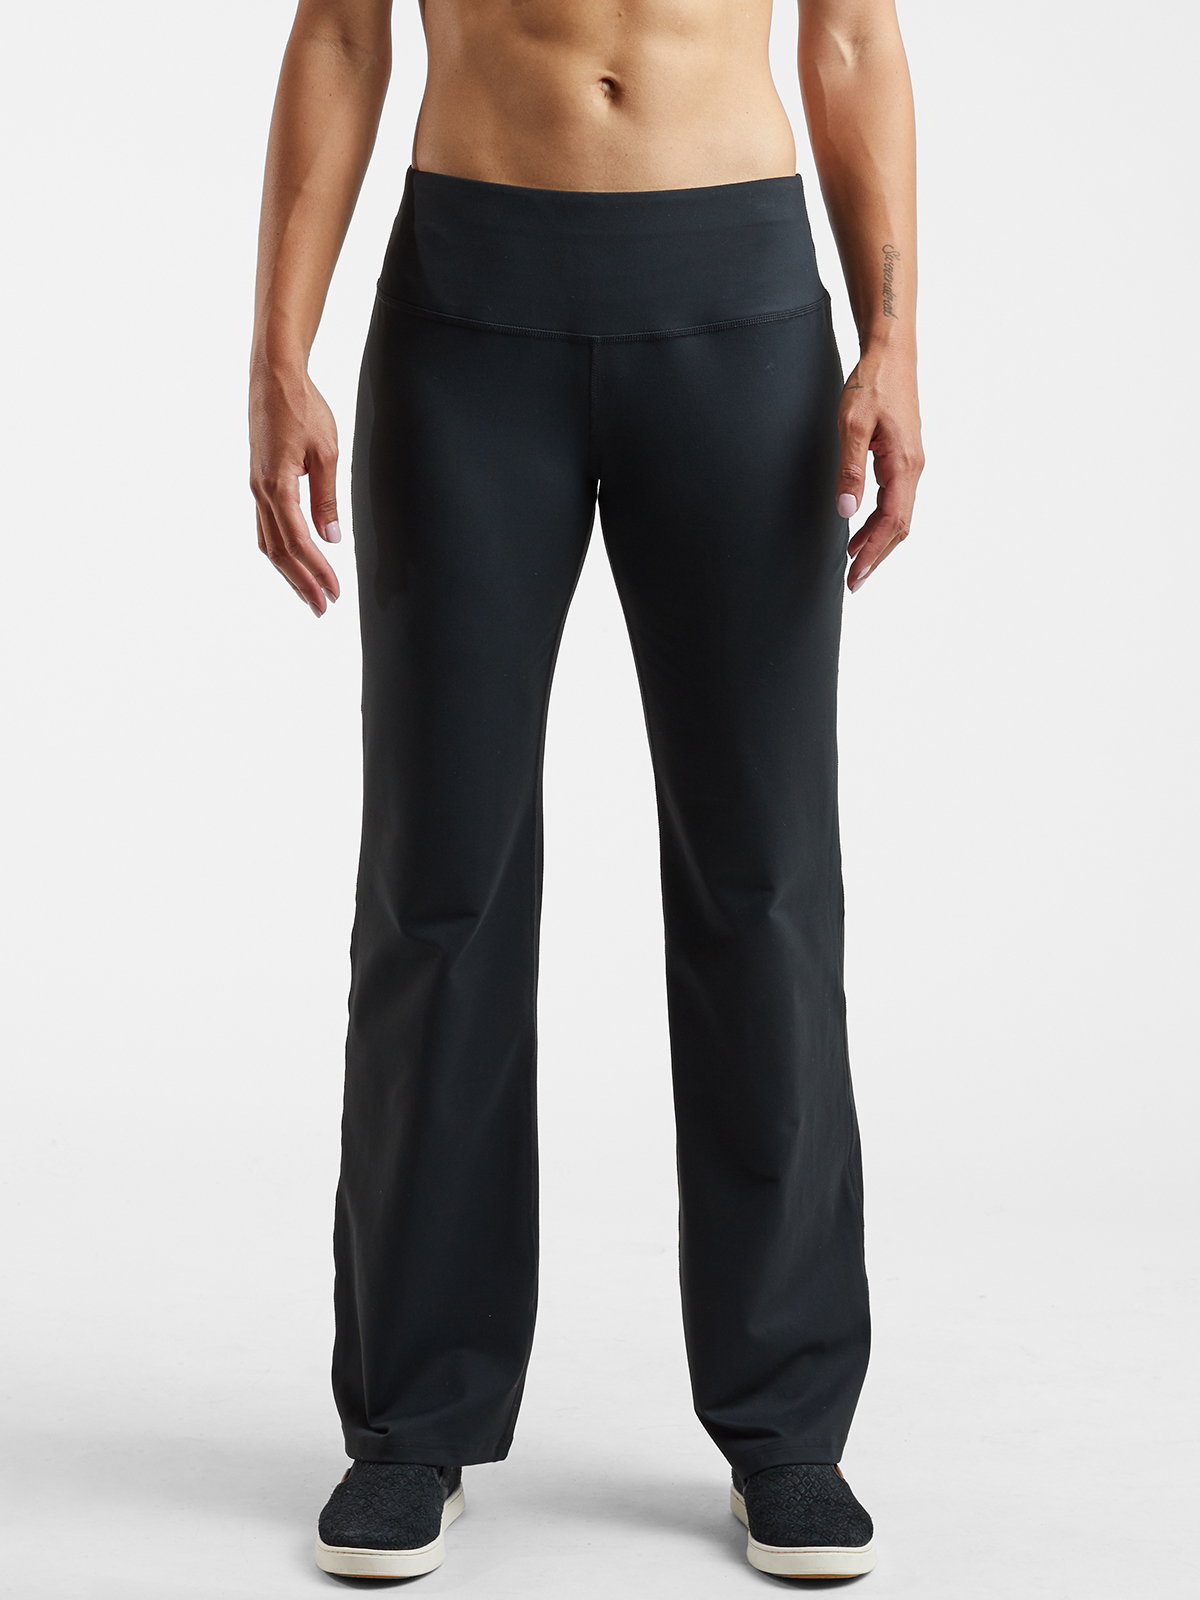 relaxed fit workout pants